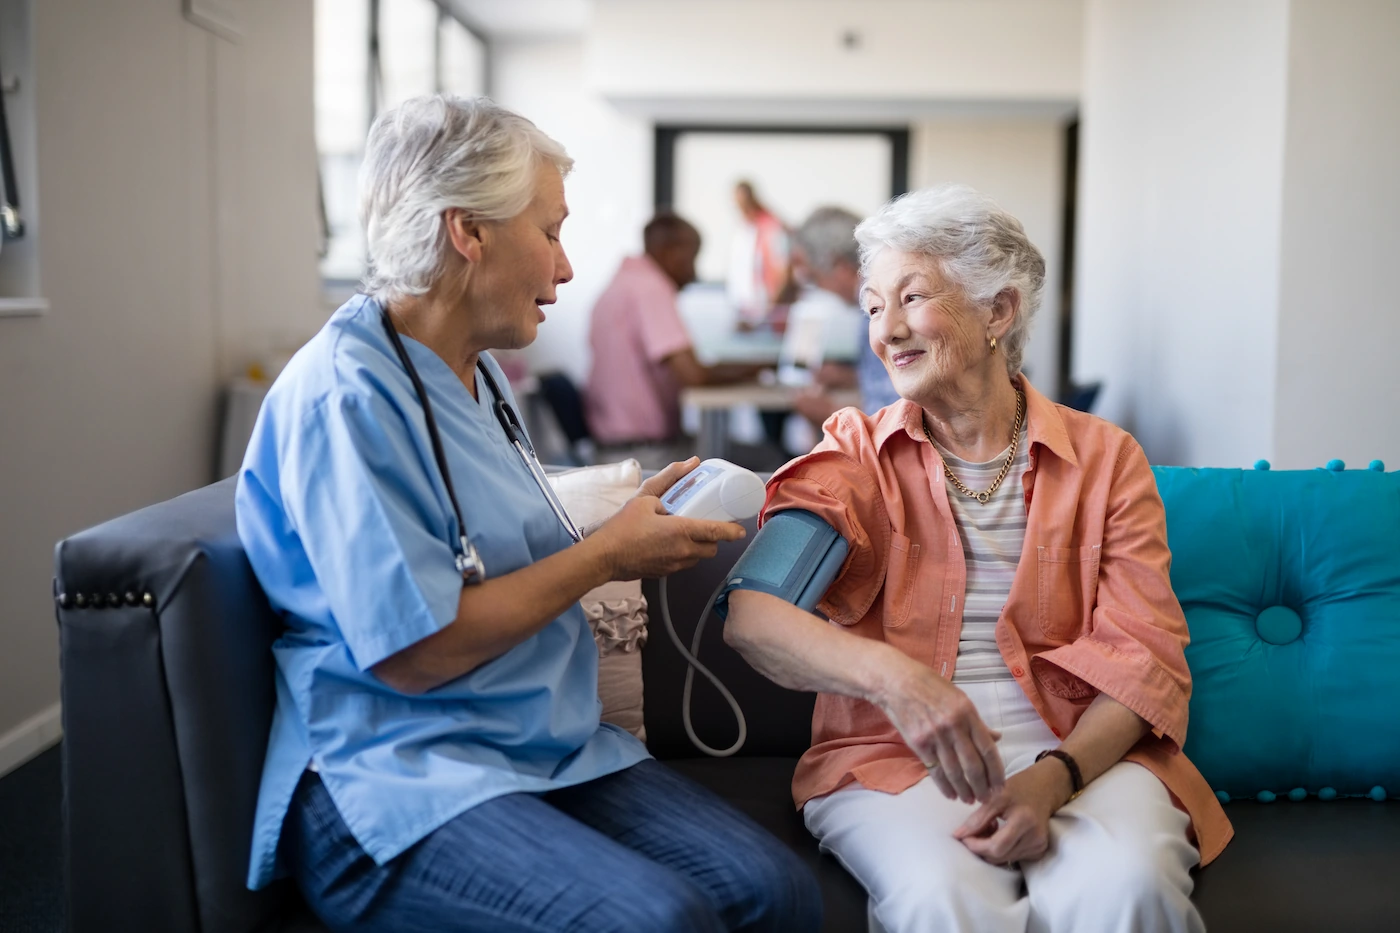 A nurse checking the blood pressure of an elderly woman in a bright room, both smiling and engaging in conversation.